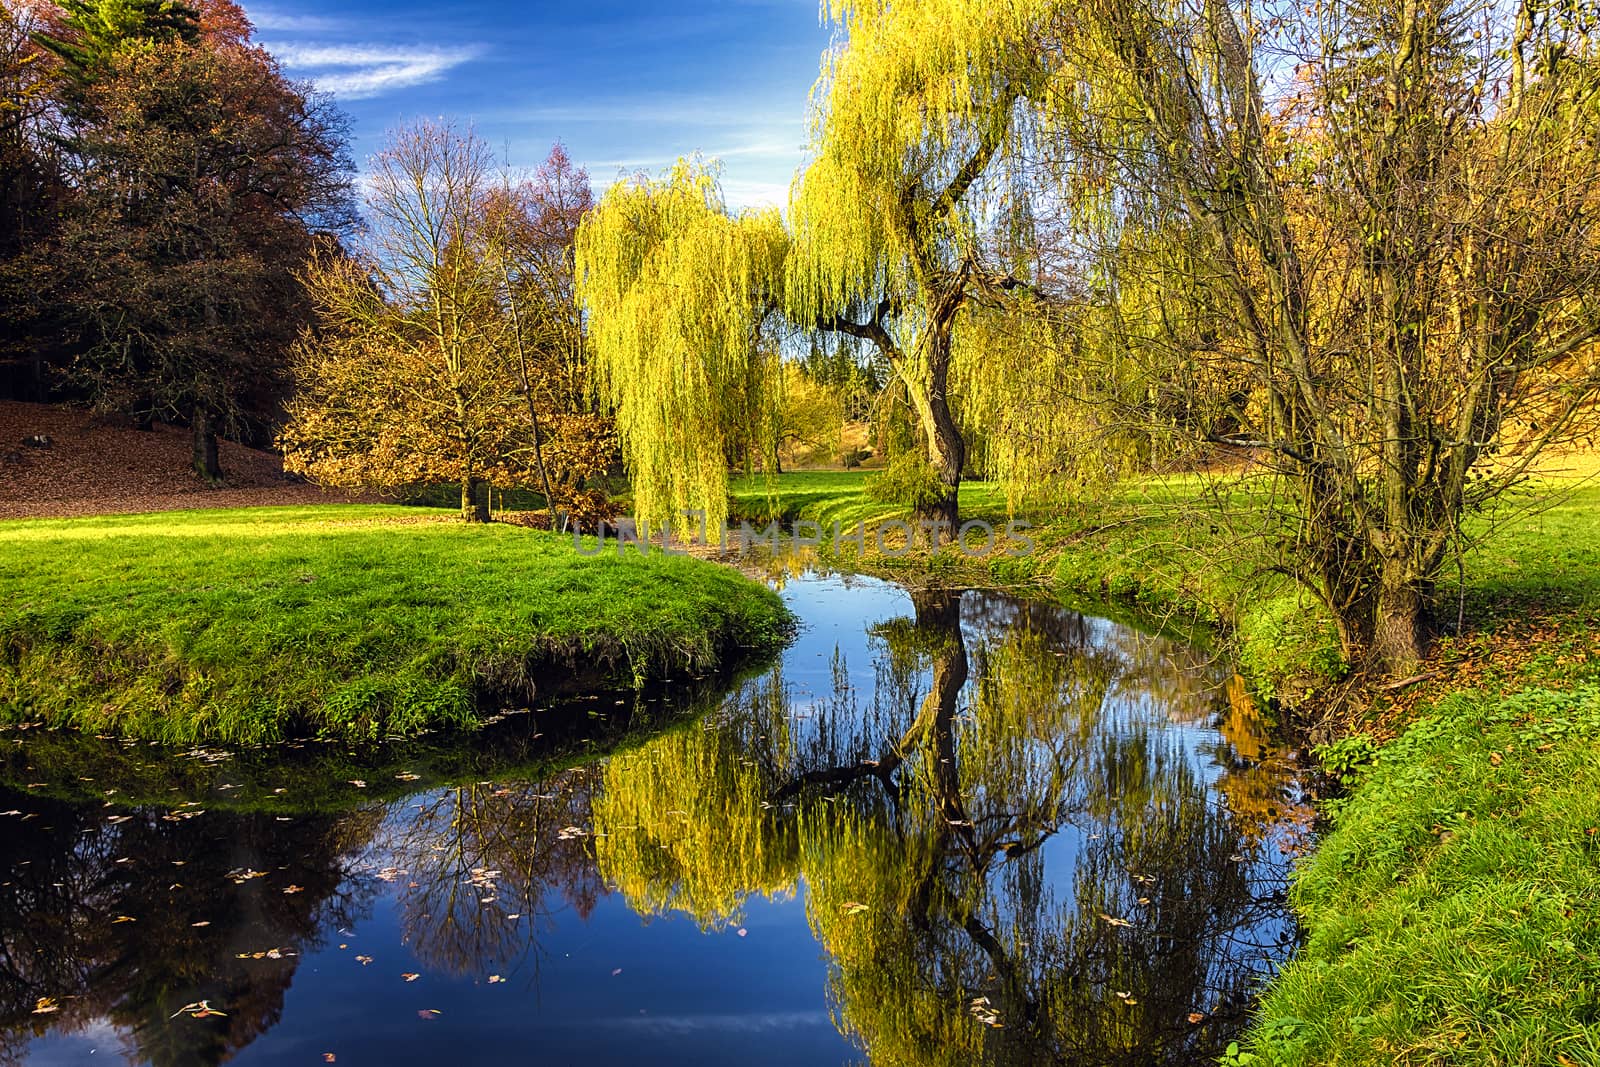 Willow tree by the Pond by hanusst